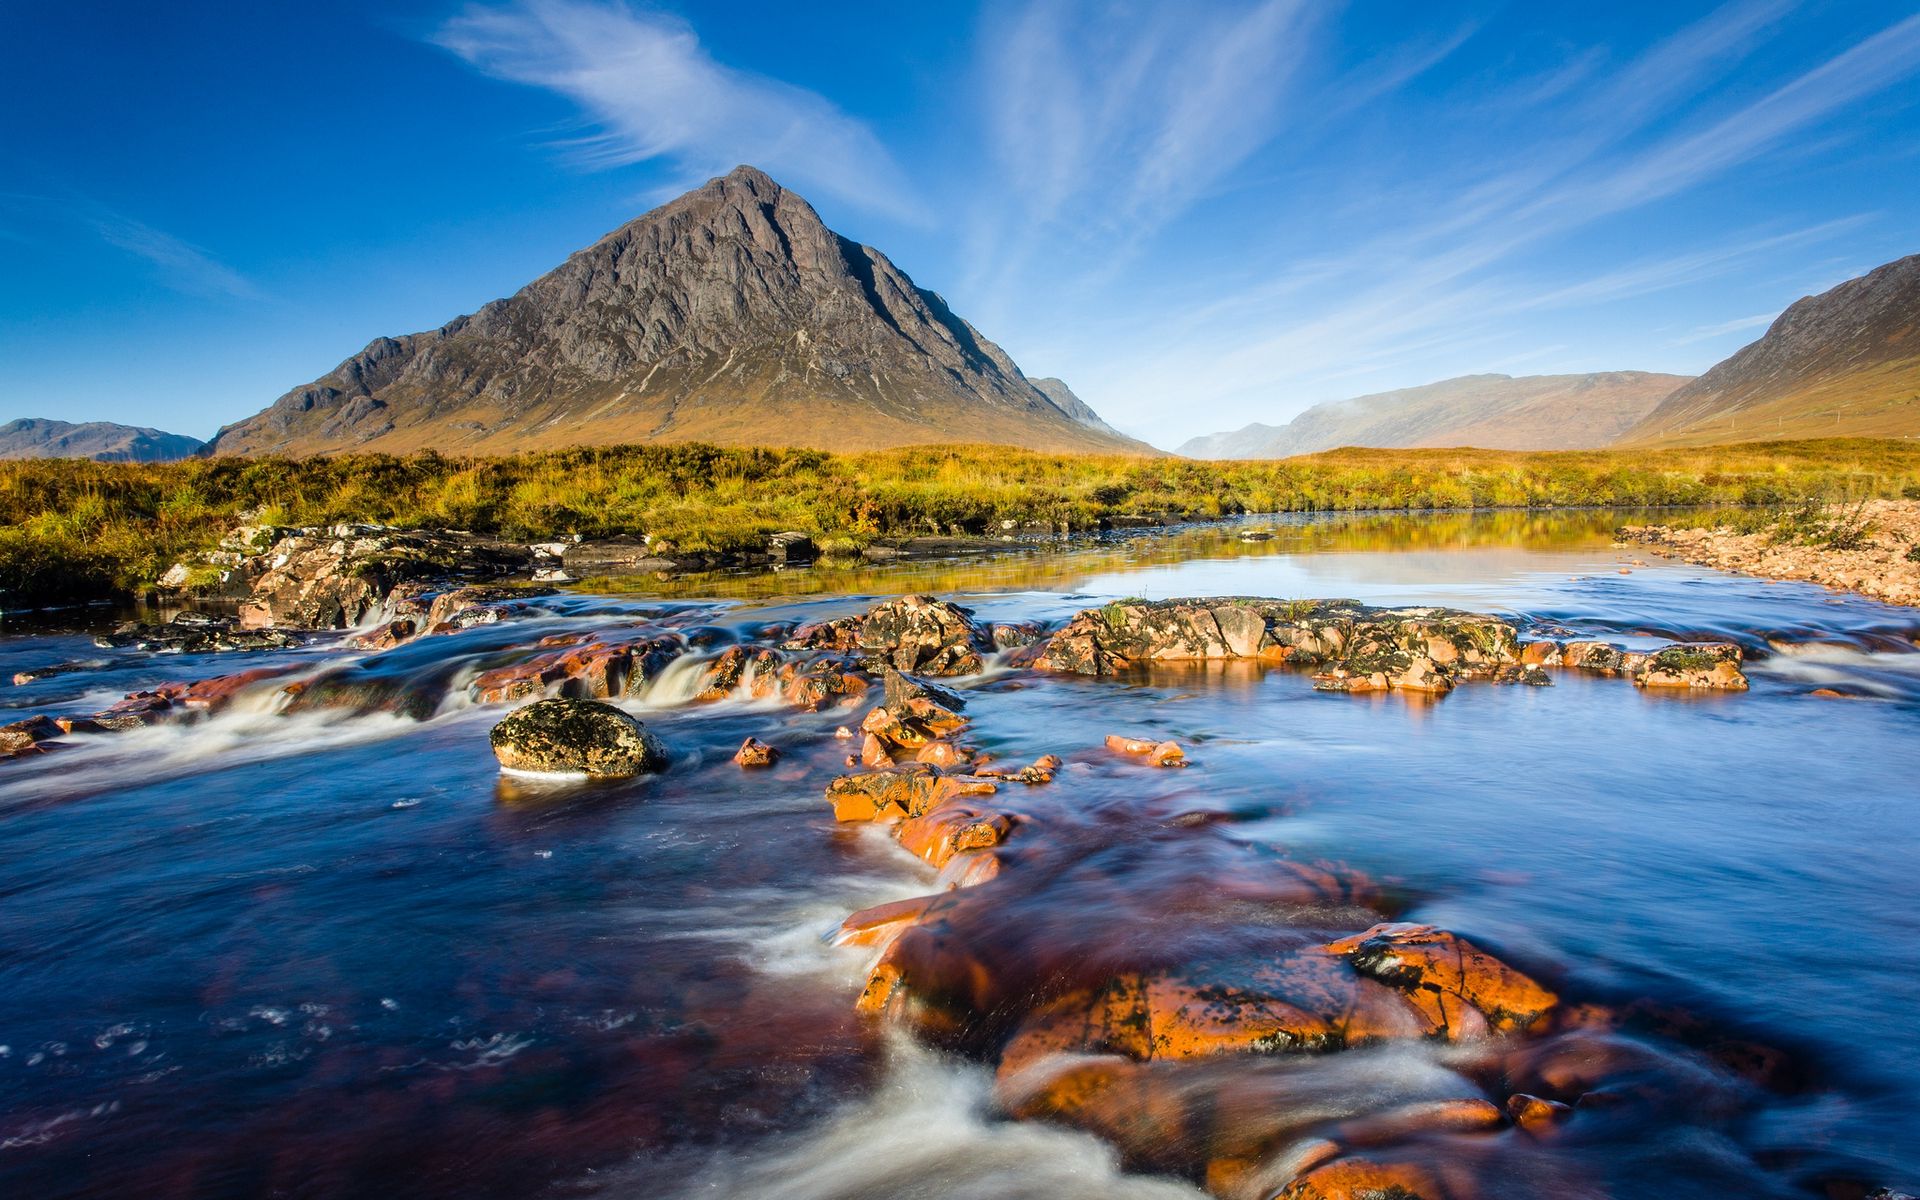 Download wallpaper 1920x1200 mountain, scotland, sky, river, stones, current widescreen 16:10 HD background